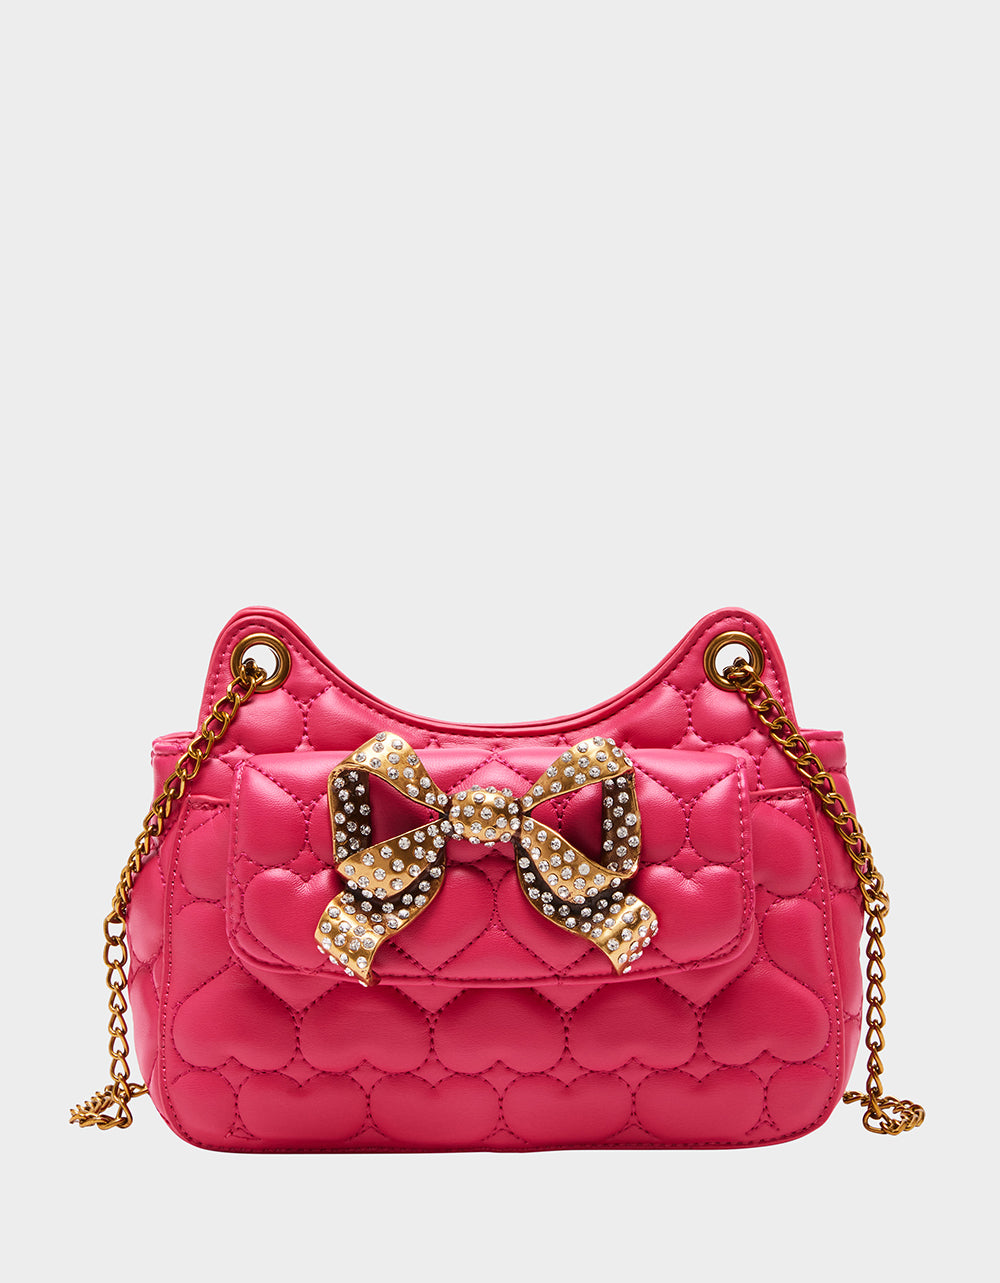 Betsey Johnson Bow To The Crowd Shoulder Bag - Macy's